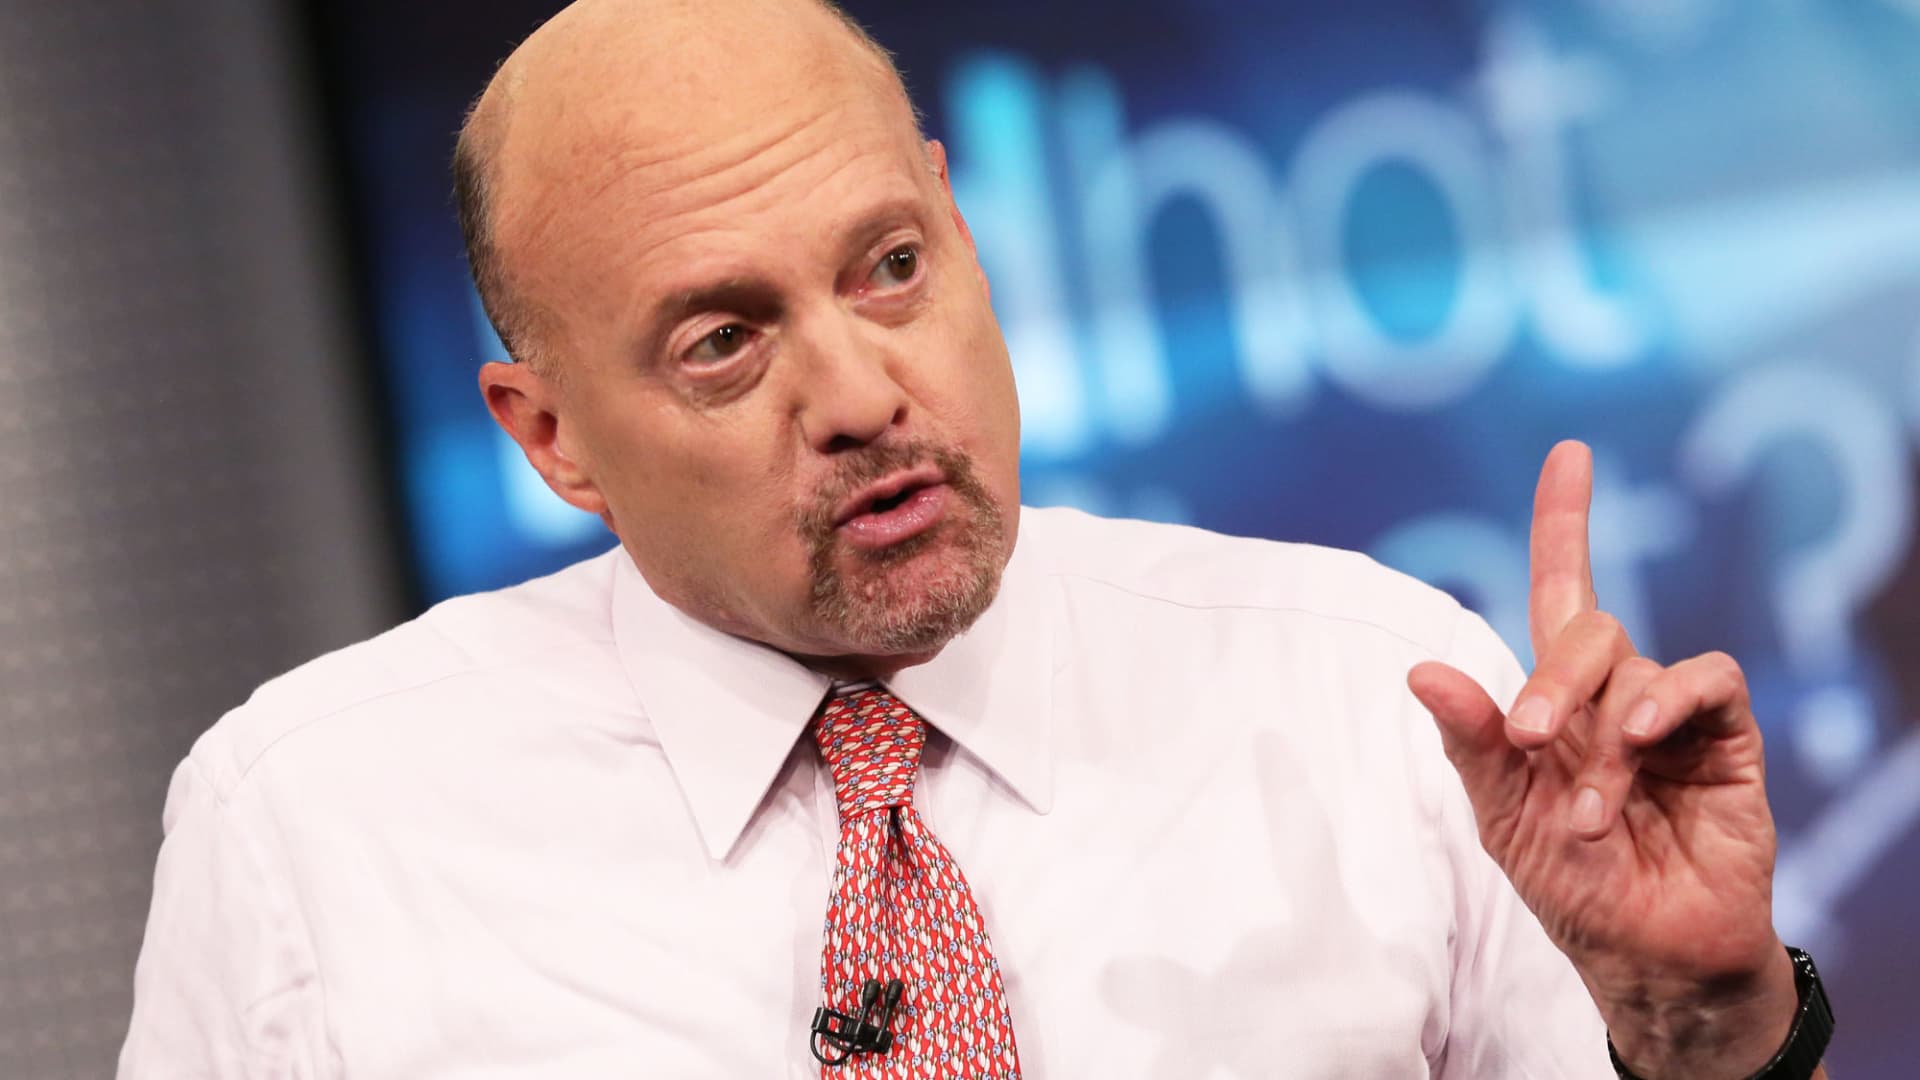 Jim Cramer claims buyers should focus less on how China influences American stocks